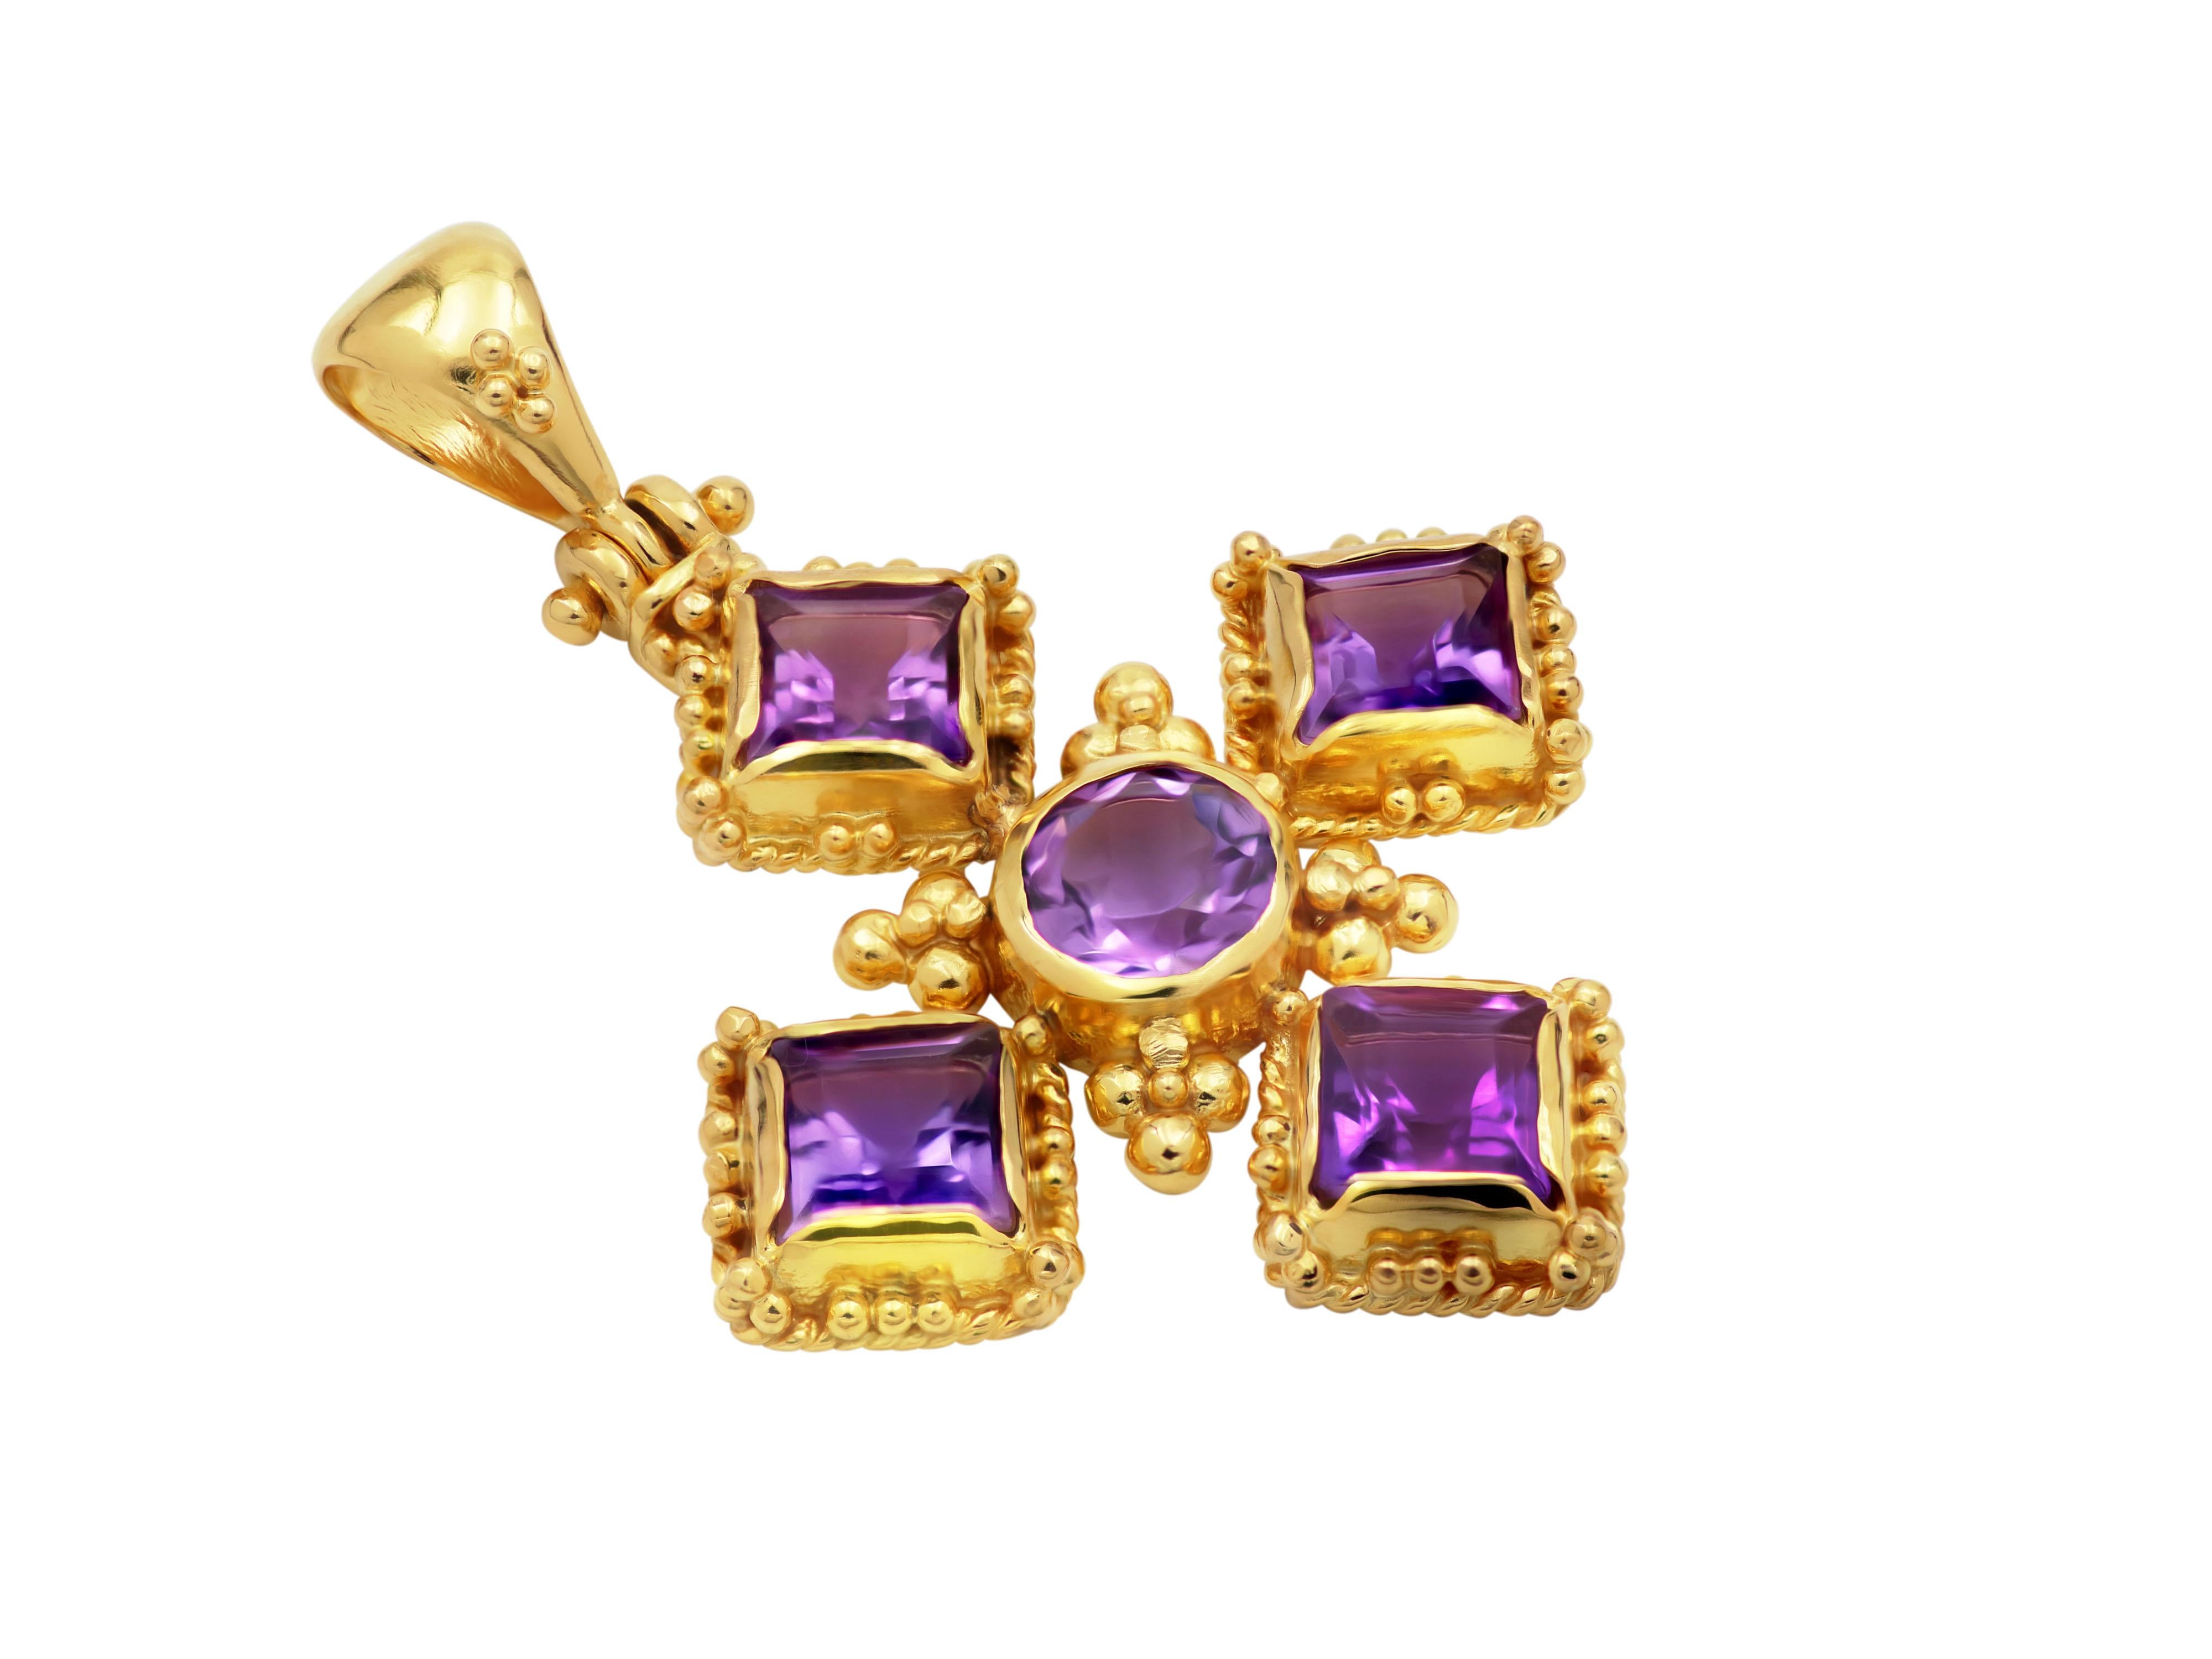 Classic cross completely handmade in the old traditional way in 18 karats gold set with princess cut amethyst decorated with granulation in different sizes.